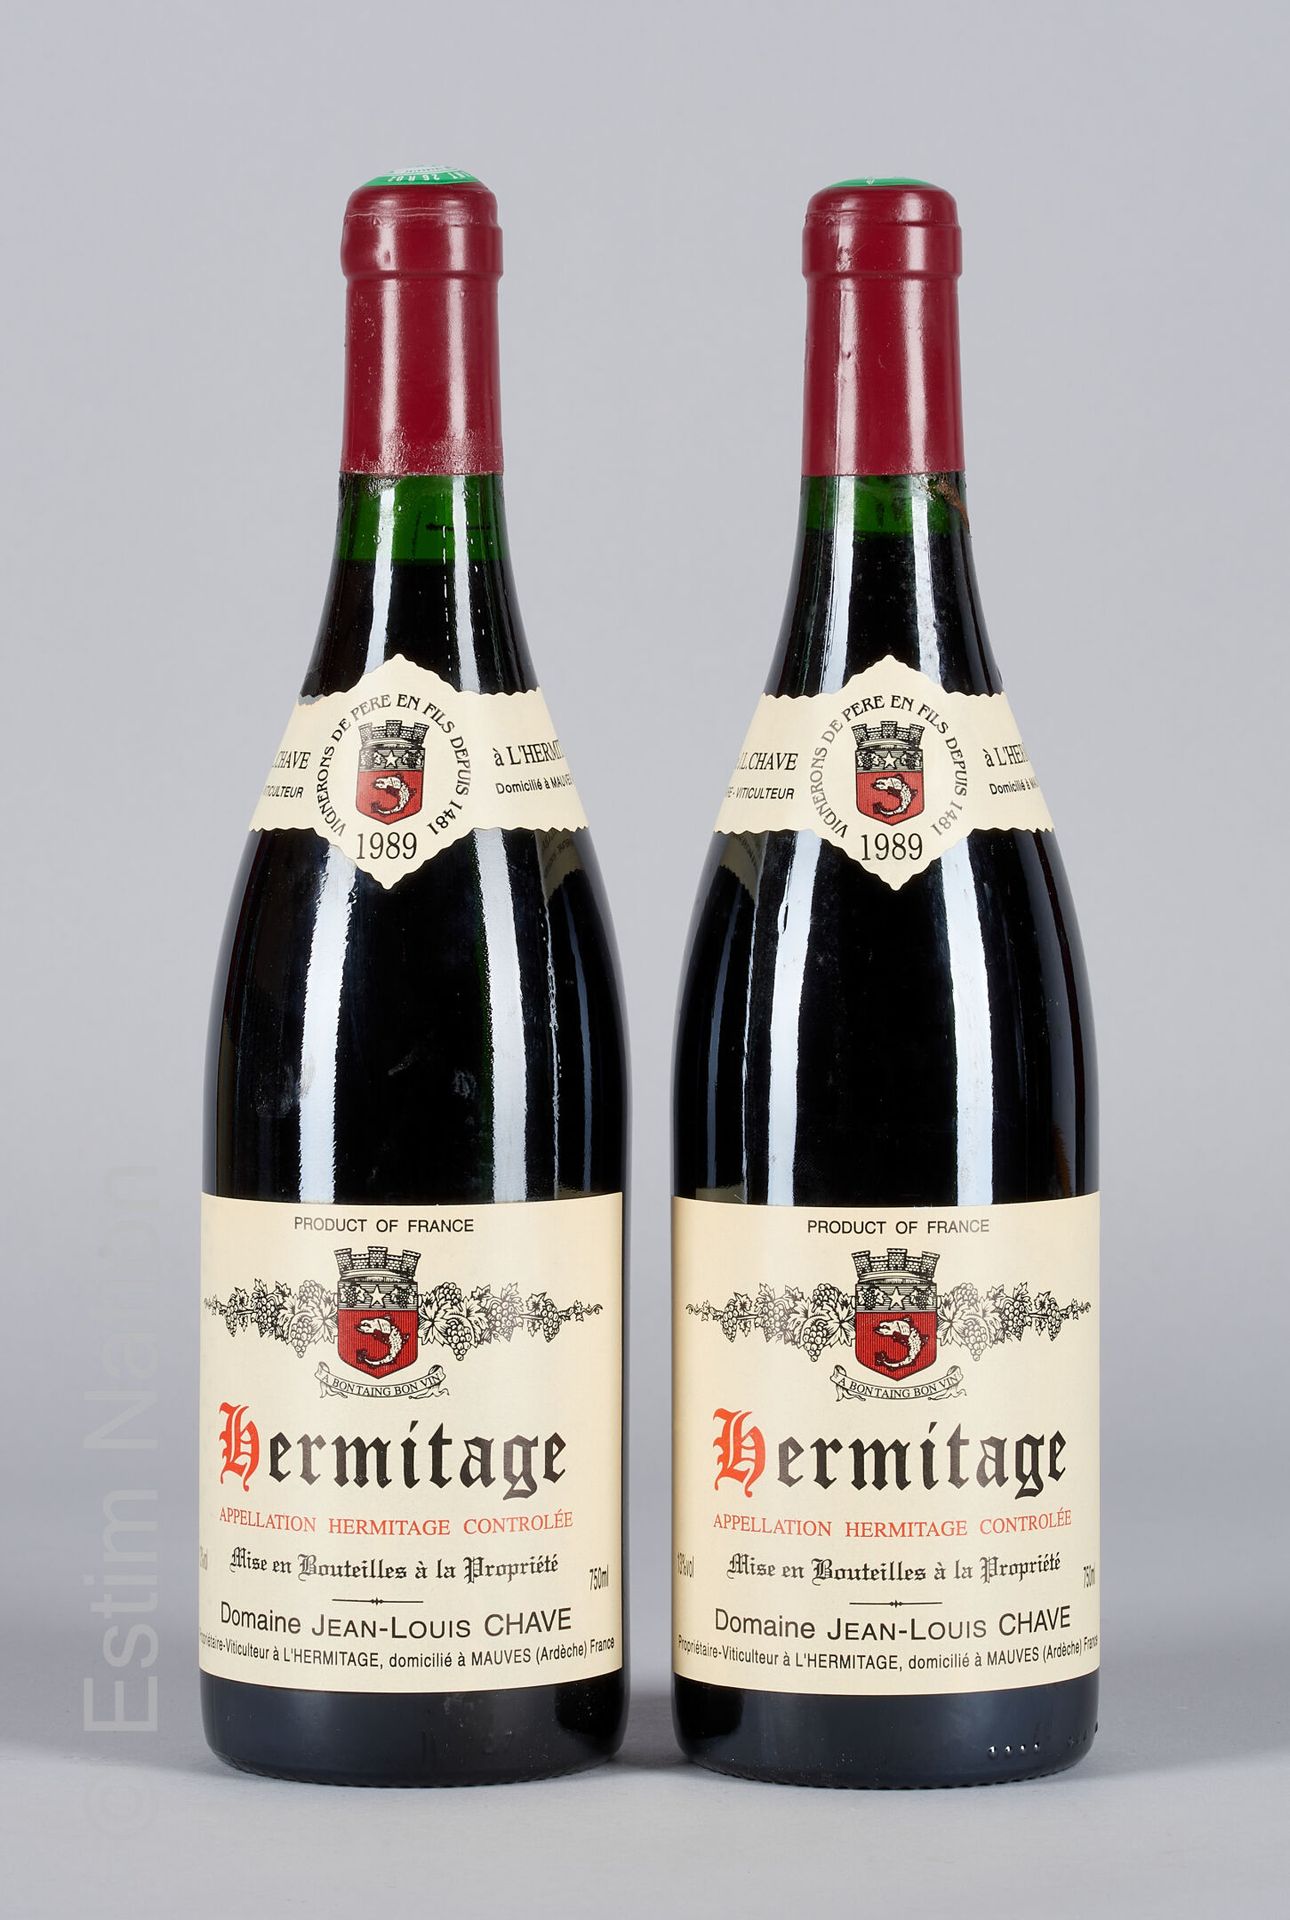 HERMITAGE ROUGE 2 bottles HERMITAGE 1989 Jean-Louis Chave

(Slight traces of dri&hellip;